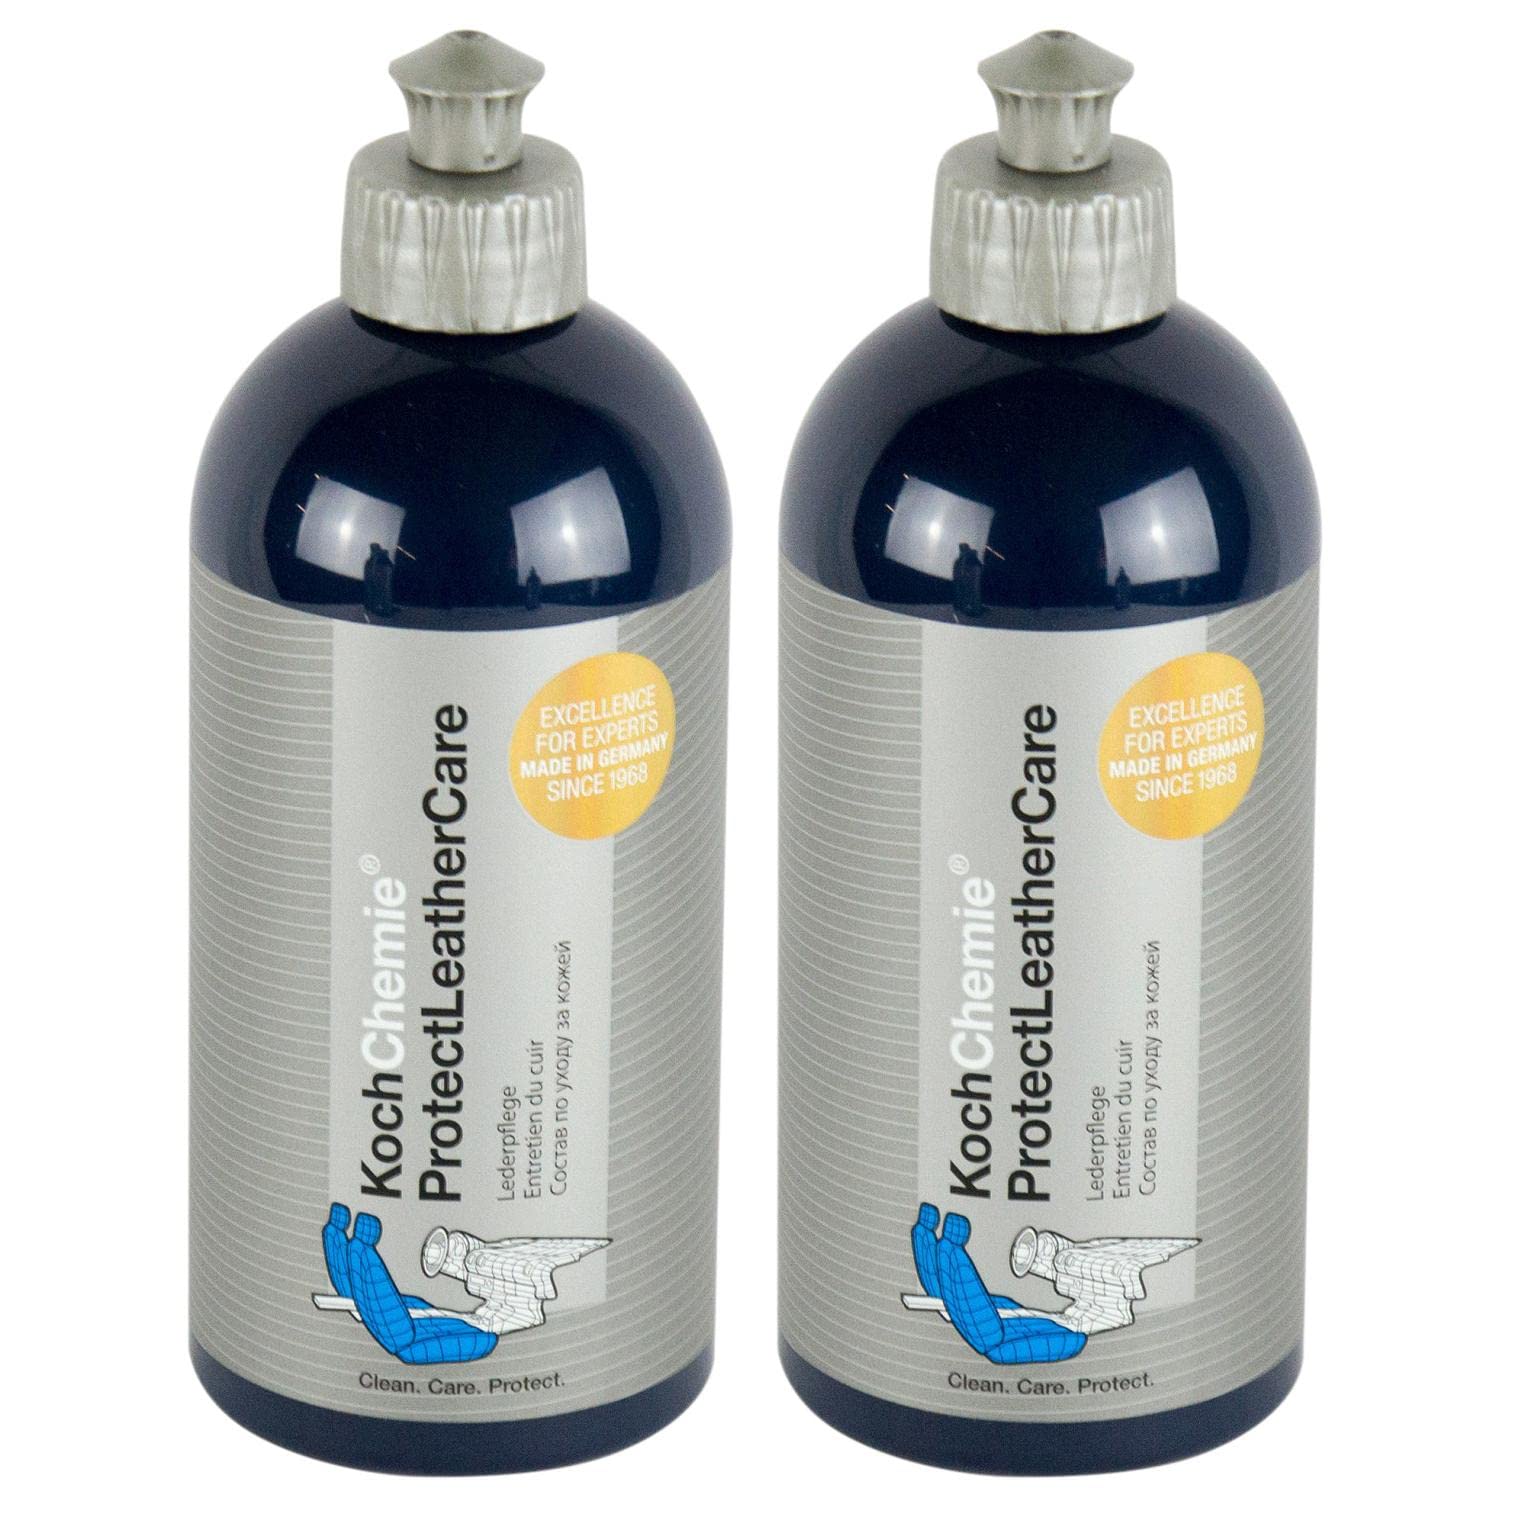 Koch Chemie 2X Protect Leather Care Lederpflege Lederreiniger Reiniger 500 ml von Koch Chemie